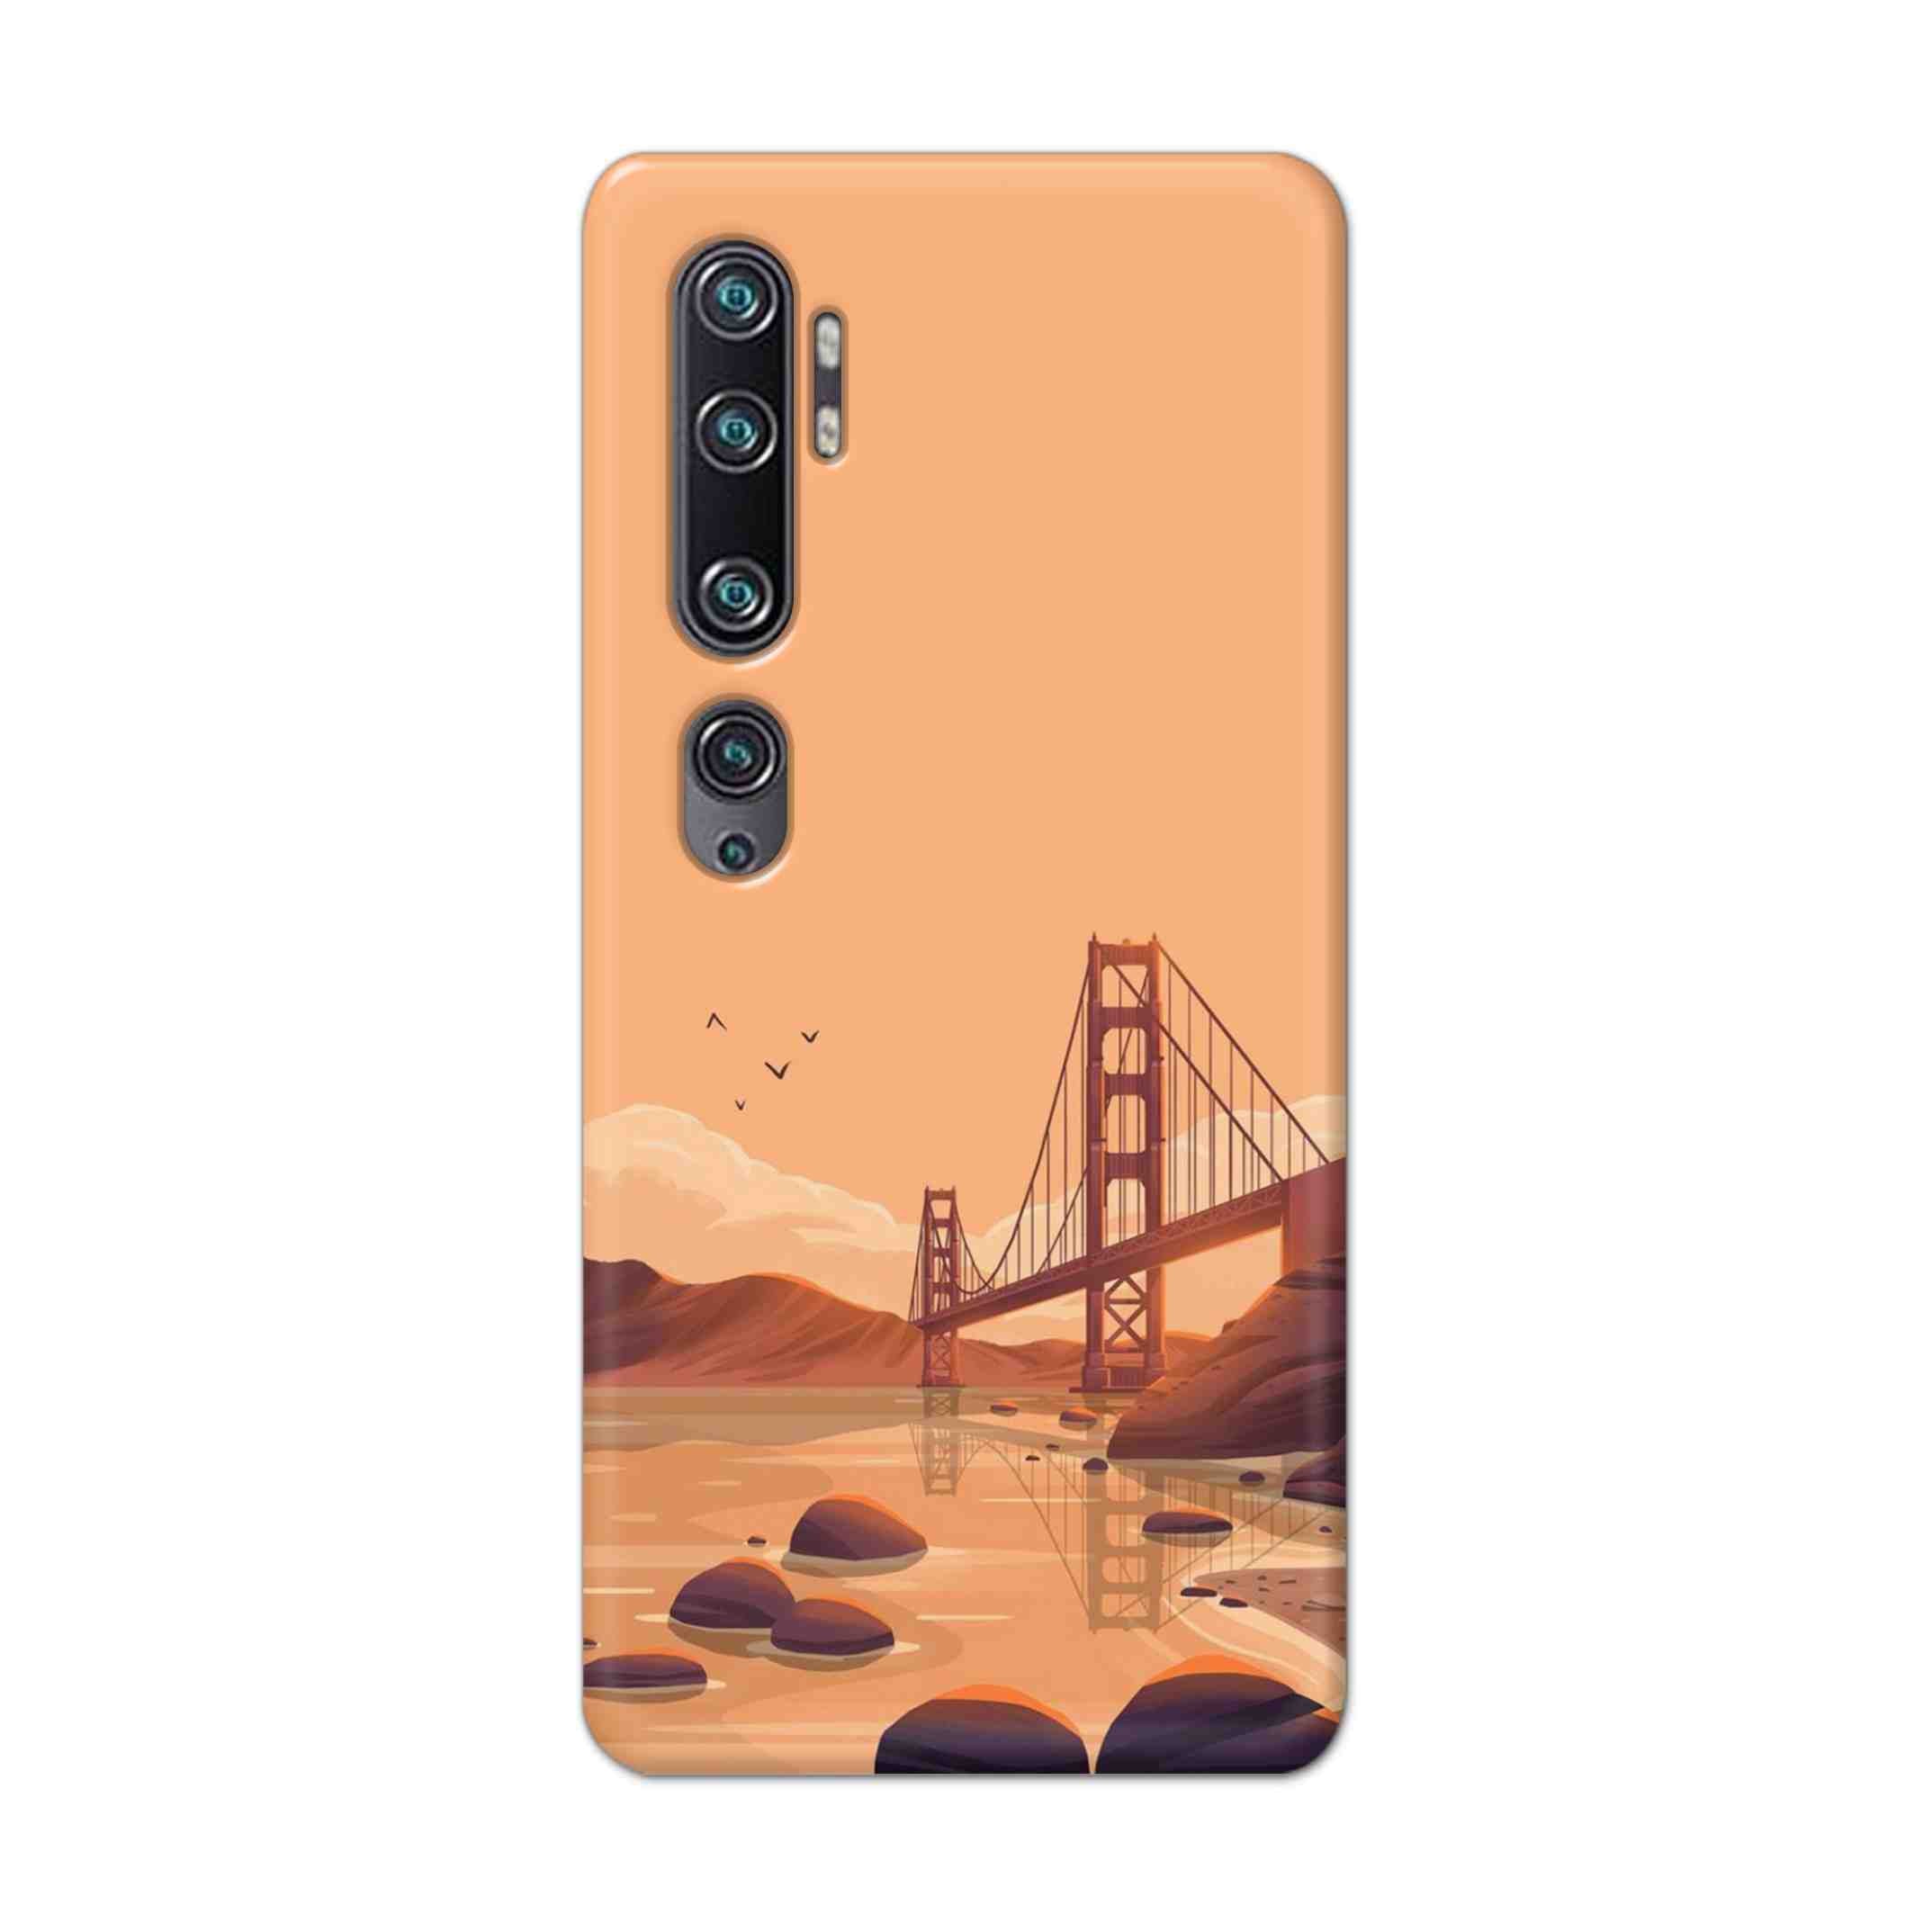 Buy San Francisco Hard Back Mobile Phone Case Cover For Xiaomi Mi Note 10 Online